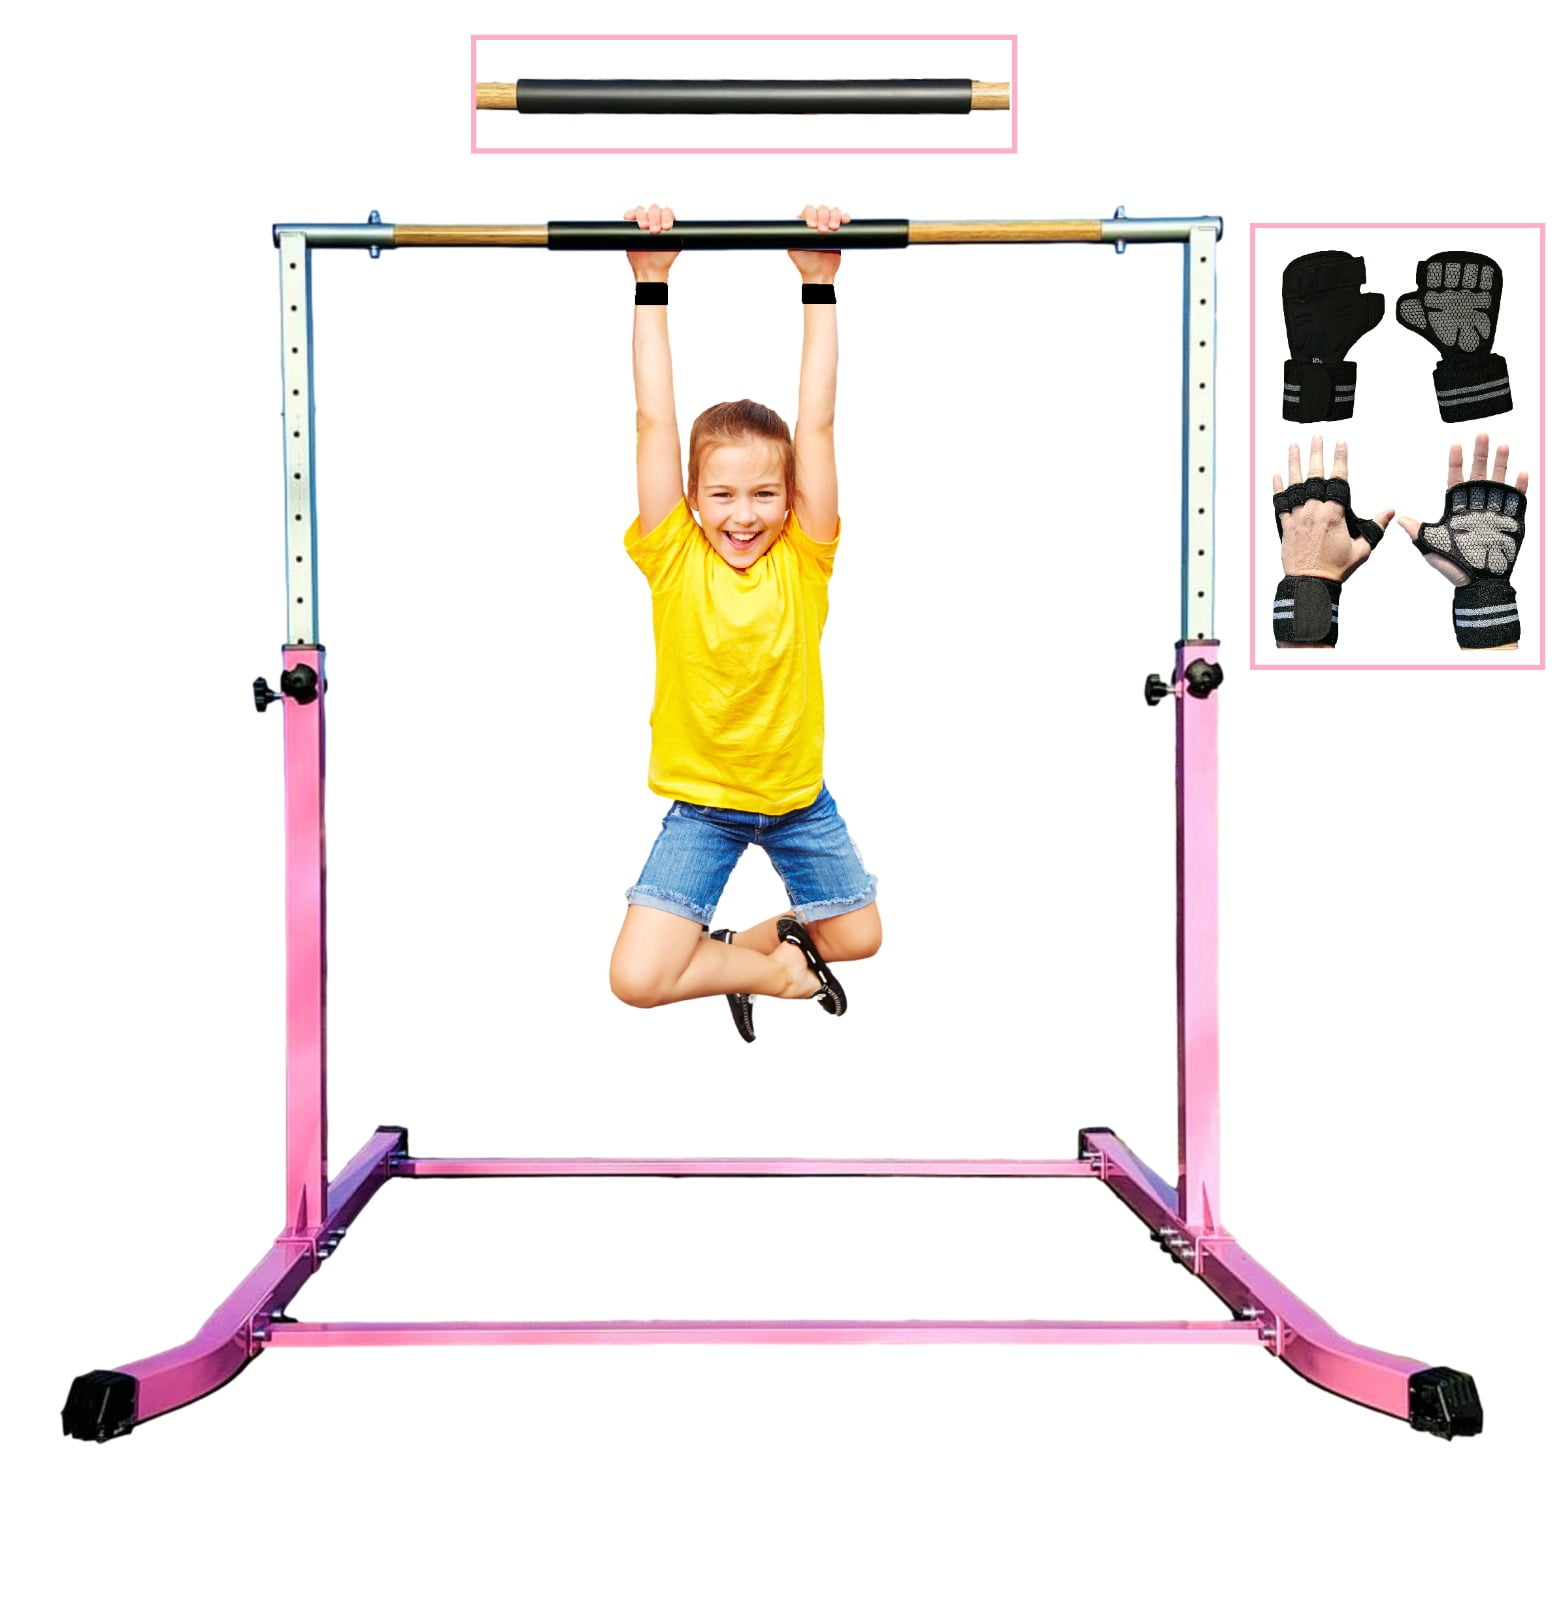 MOPHOTO Expandable Gymnastics Jr Kip Bar Horizontal Bar for Home w/13 Adjustable Height Modes for Kids/Youth/Junior Training Exercise 